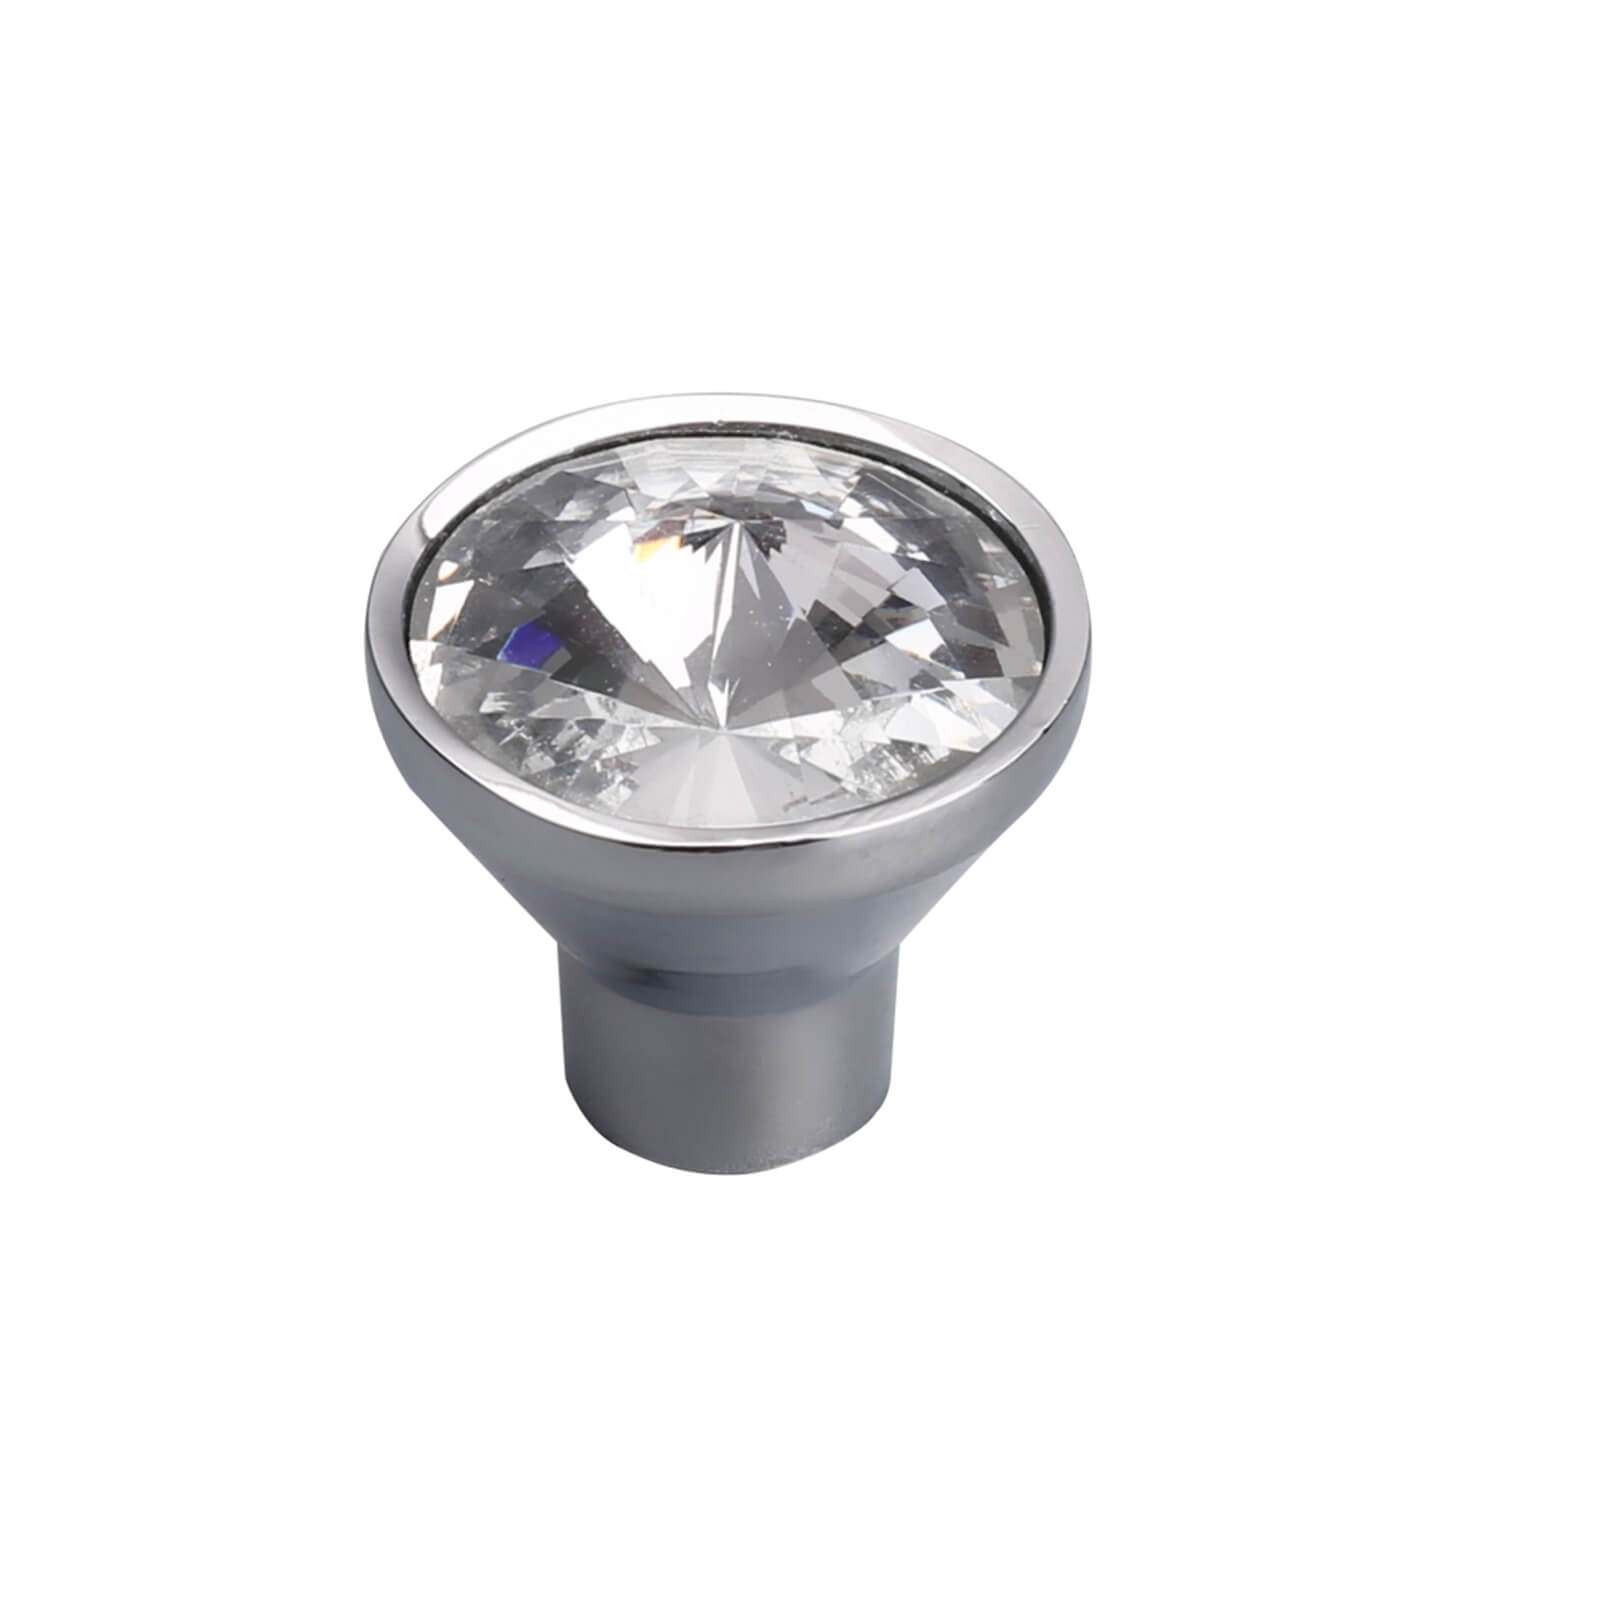 Tapered Crystal Knob - Chrome Plated - 30mm